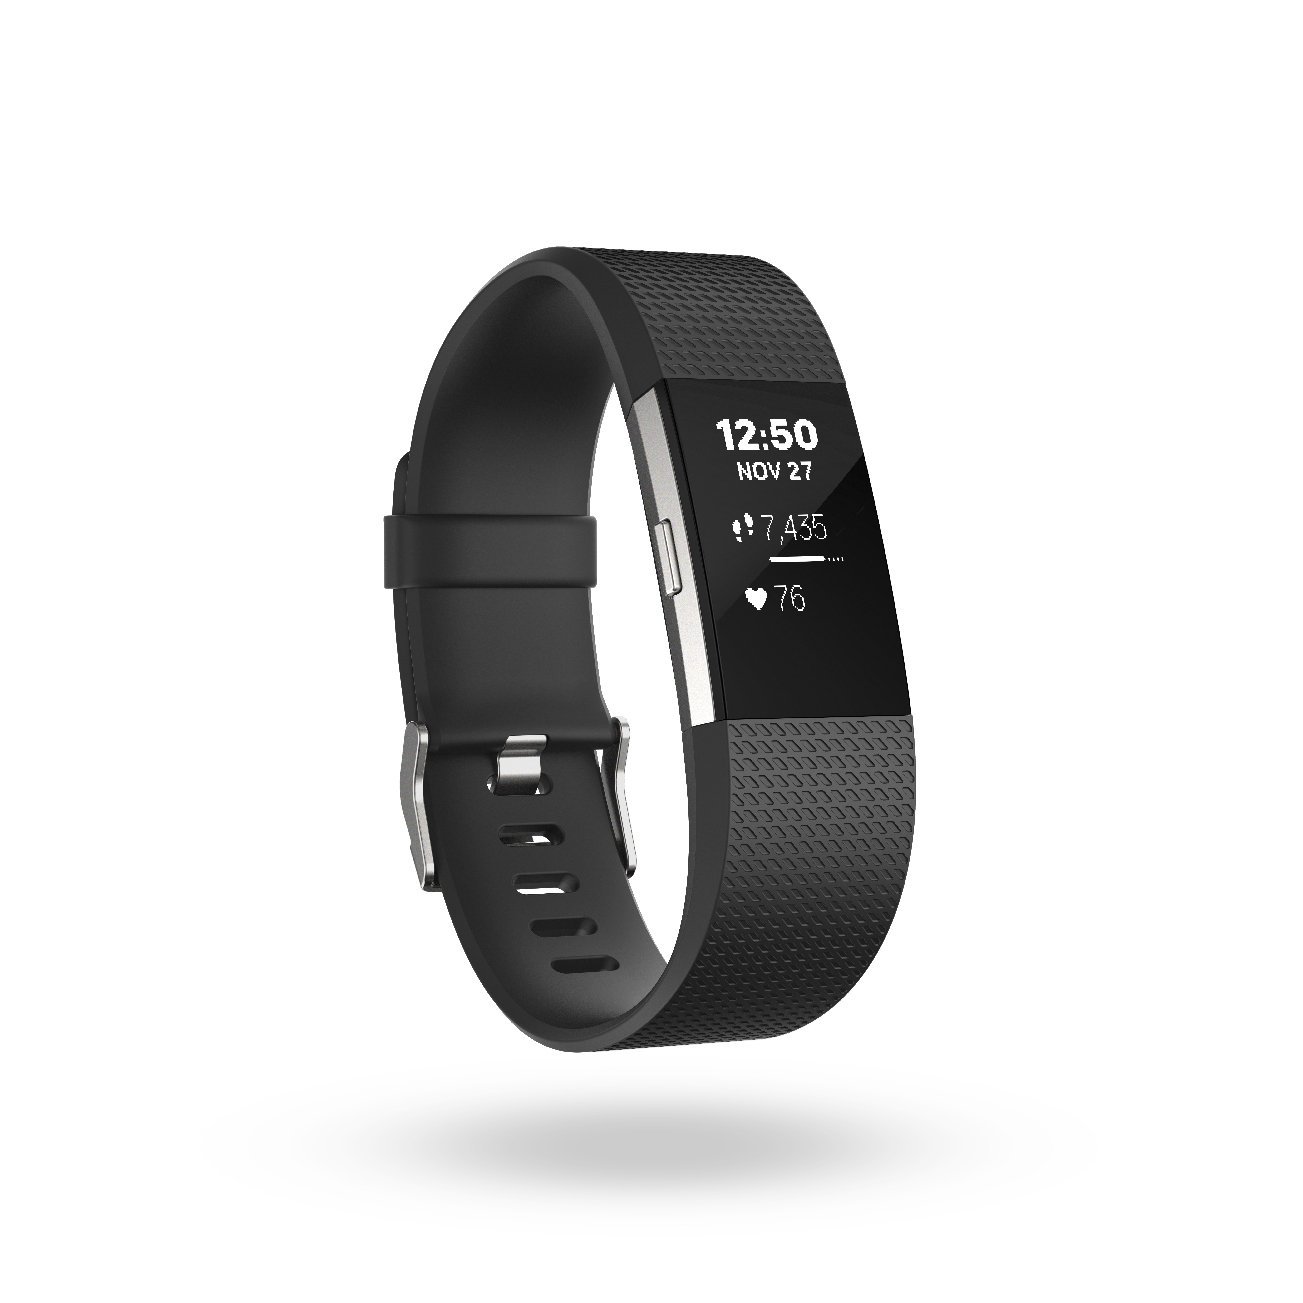 Fitbit Charge Photos Image And Wallpaper Mouthshut